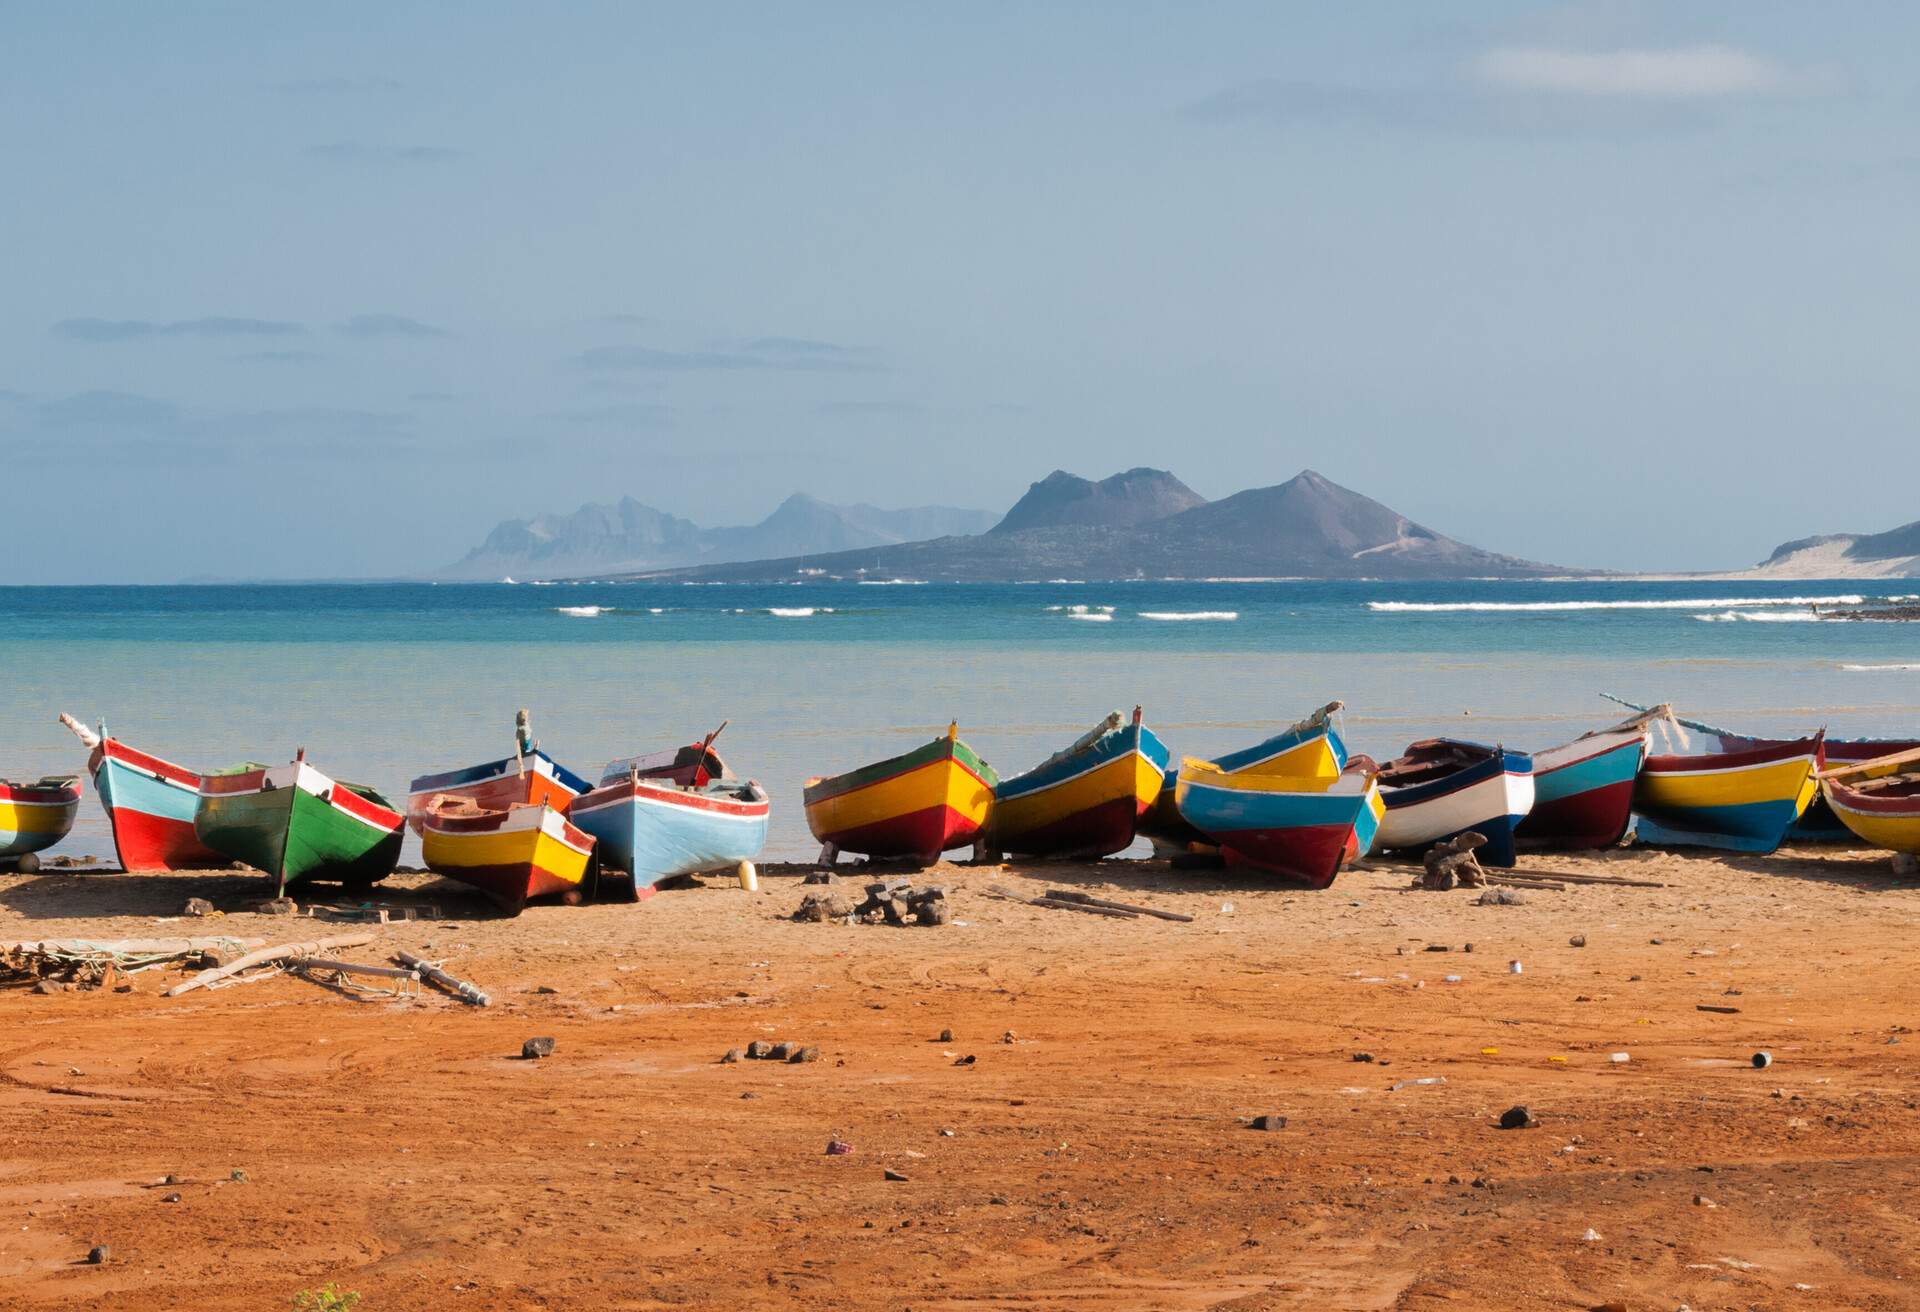 Colourful fishing boats rest peacefully on the sandy beach, their vibrant hues contrasting against the clear blue sea, while majestic mountains rise in the distance.